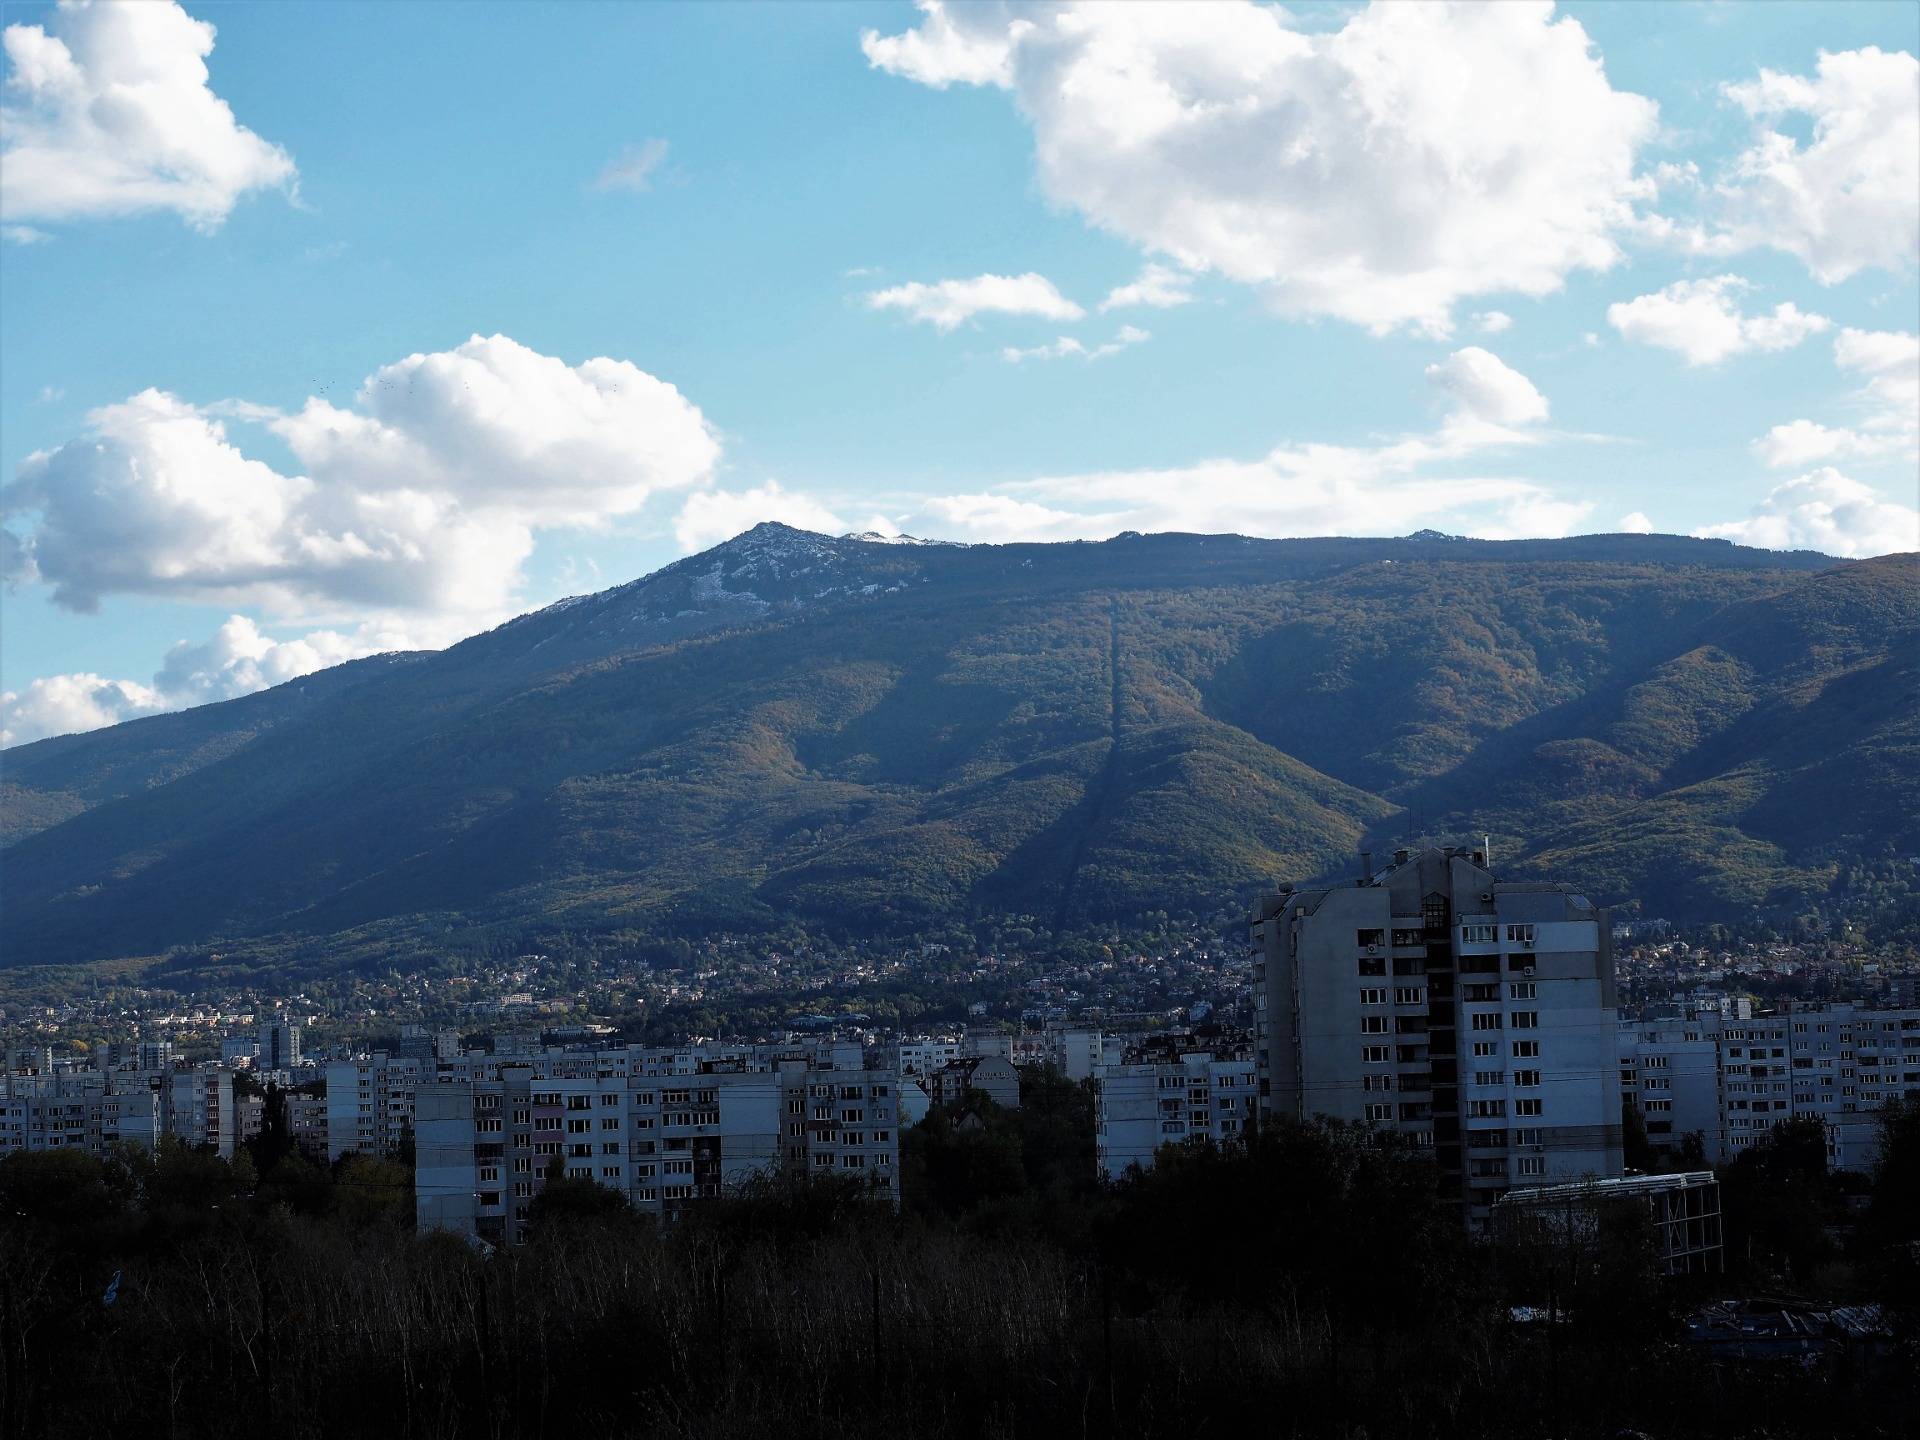 View of Vitosha Mountain from one district of the city of Sofia.